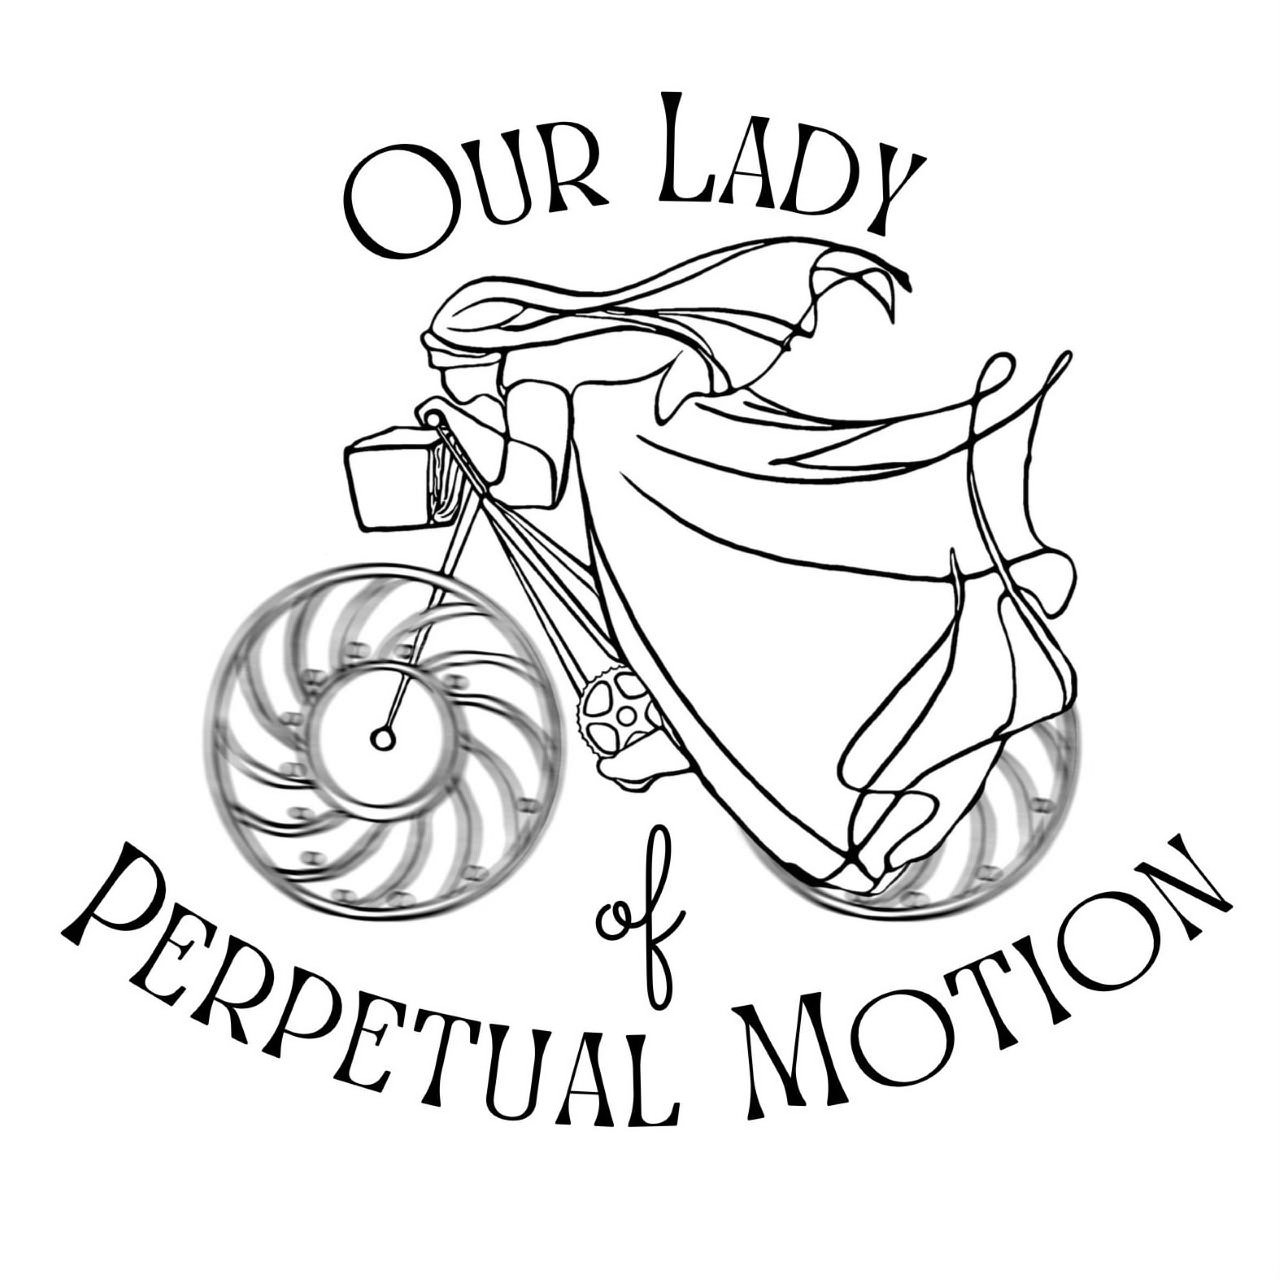  OUR LADY OF PERPETUAL MOTION